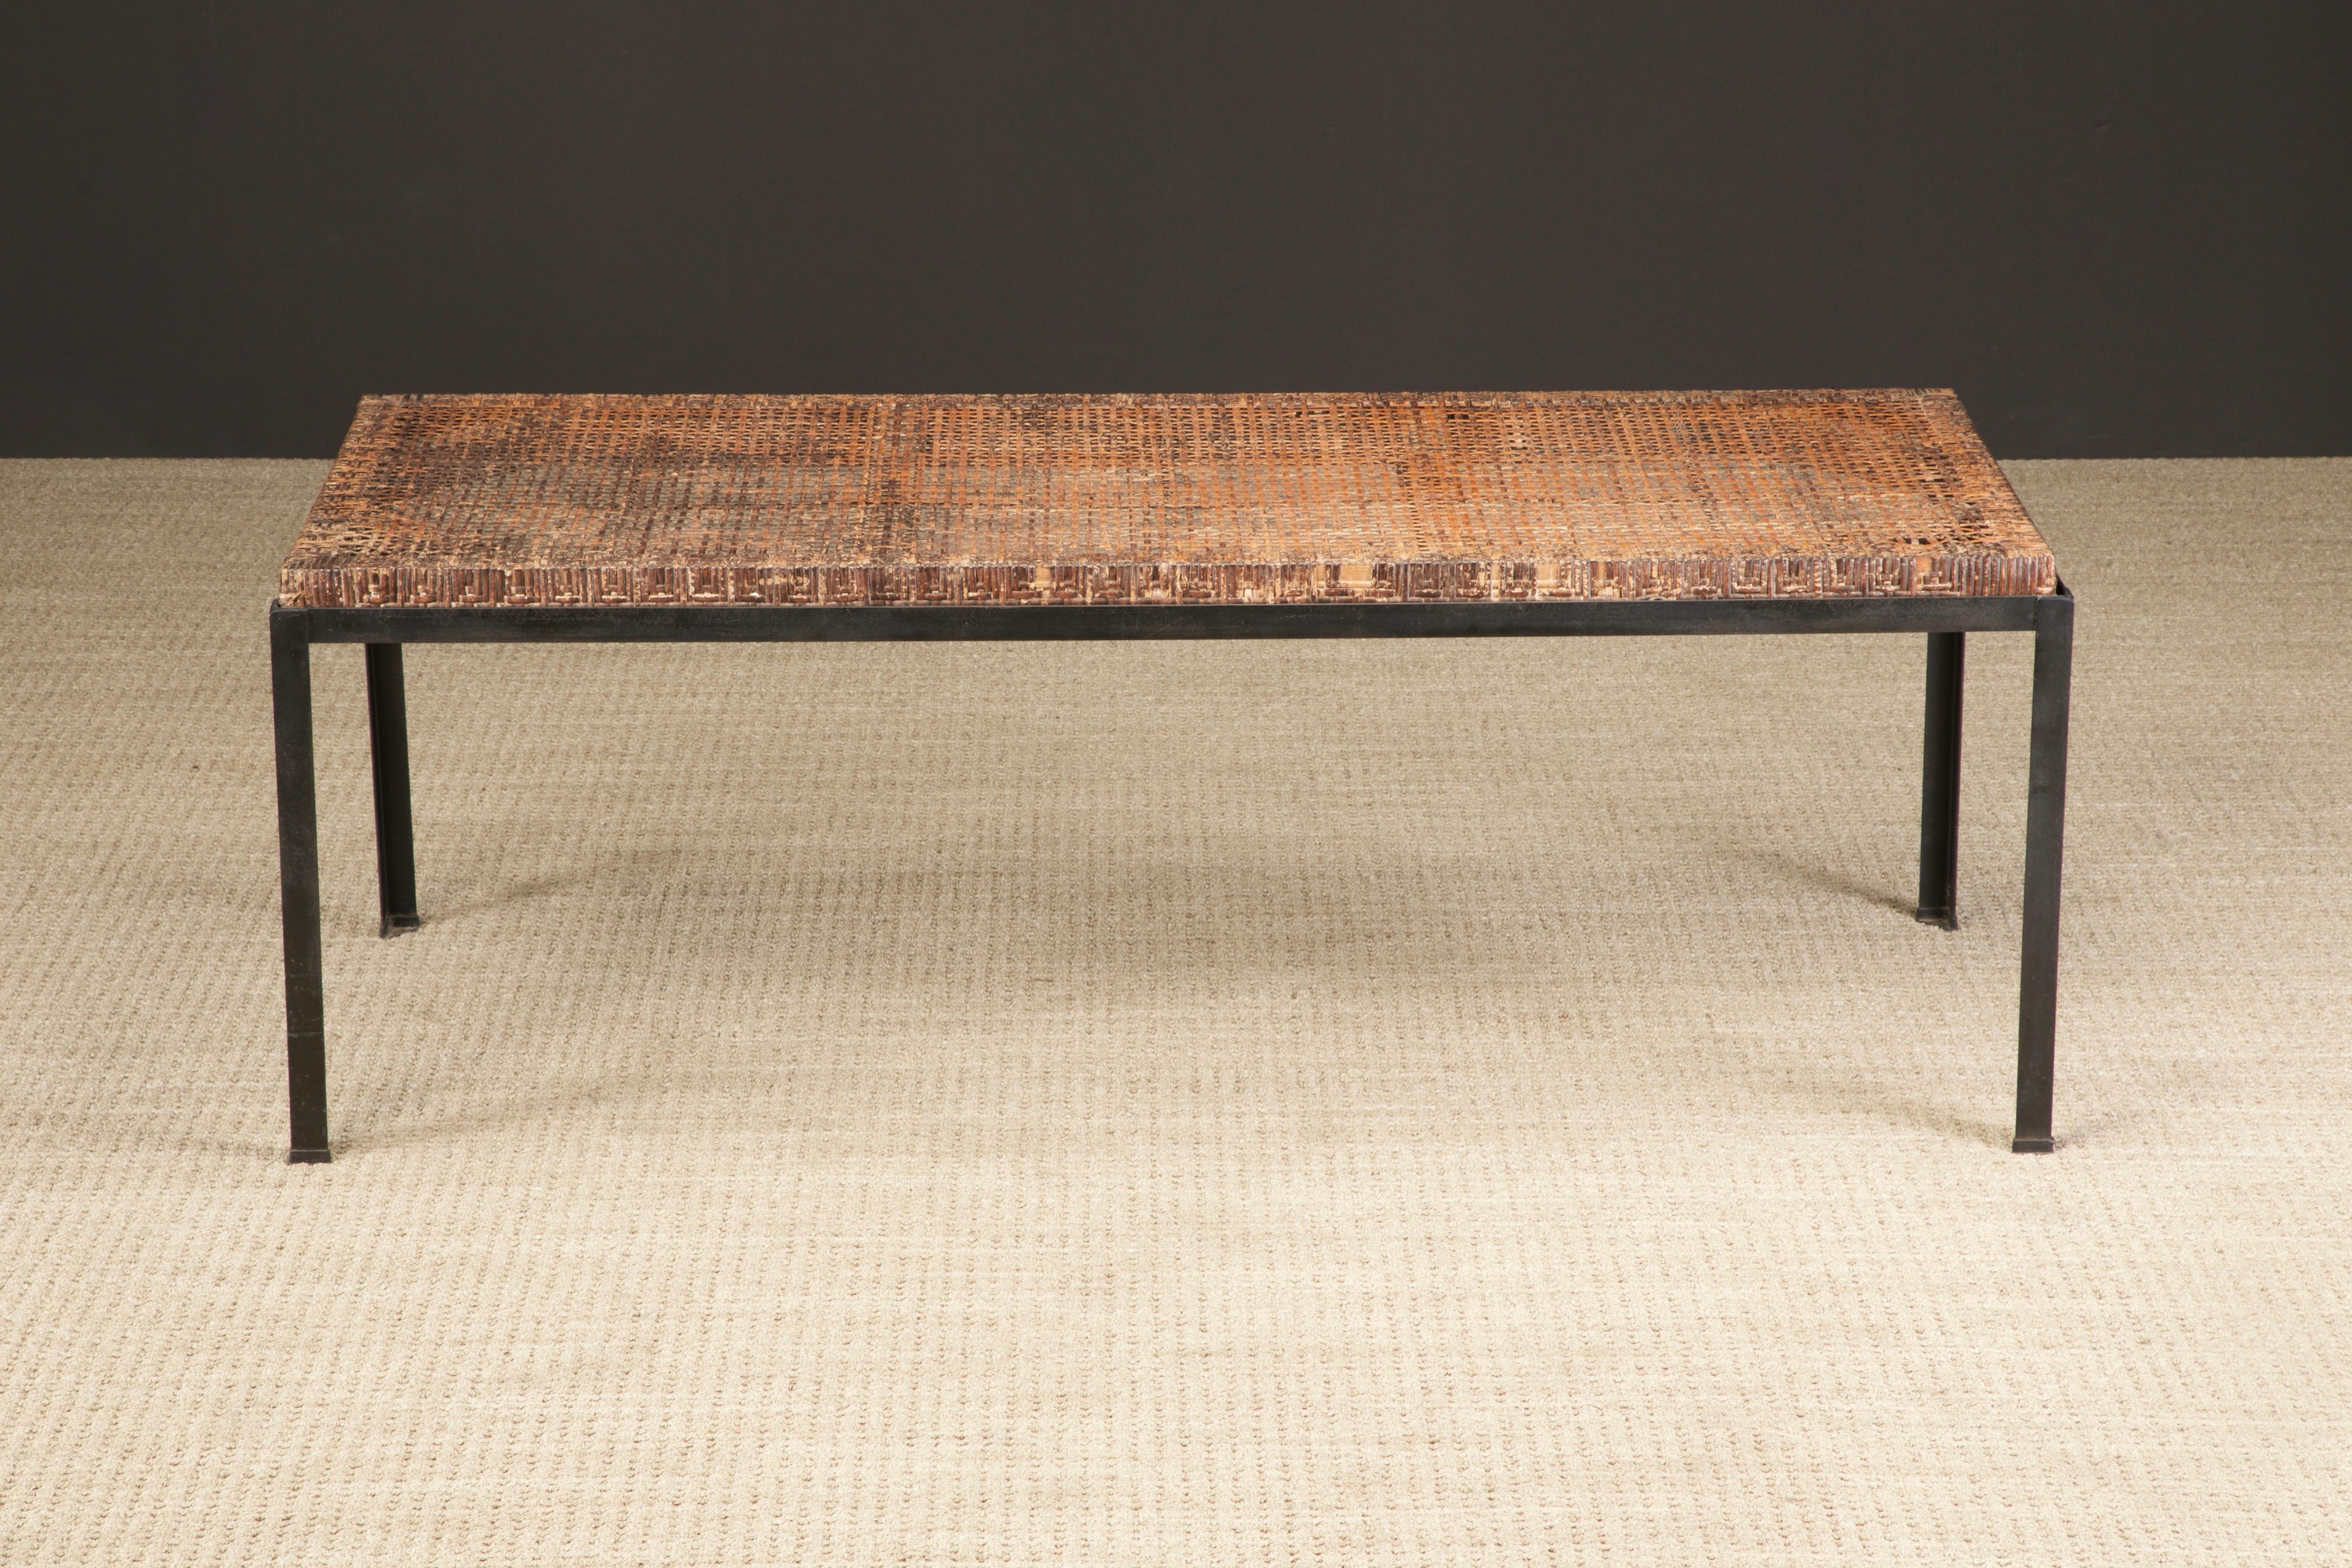 Mid-Century Modern Caned Dining Table by Danny Ho Fong for Tropi-cal in Iron and Rattan, c 1960s For Sale